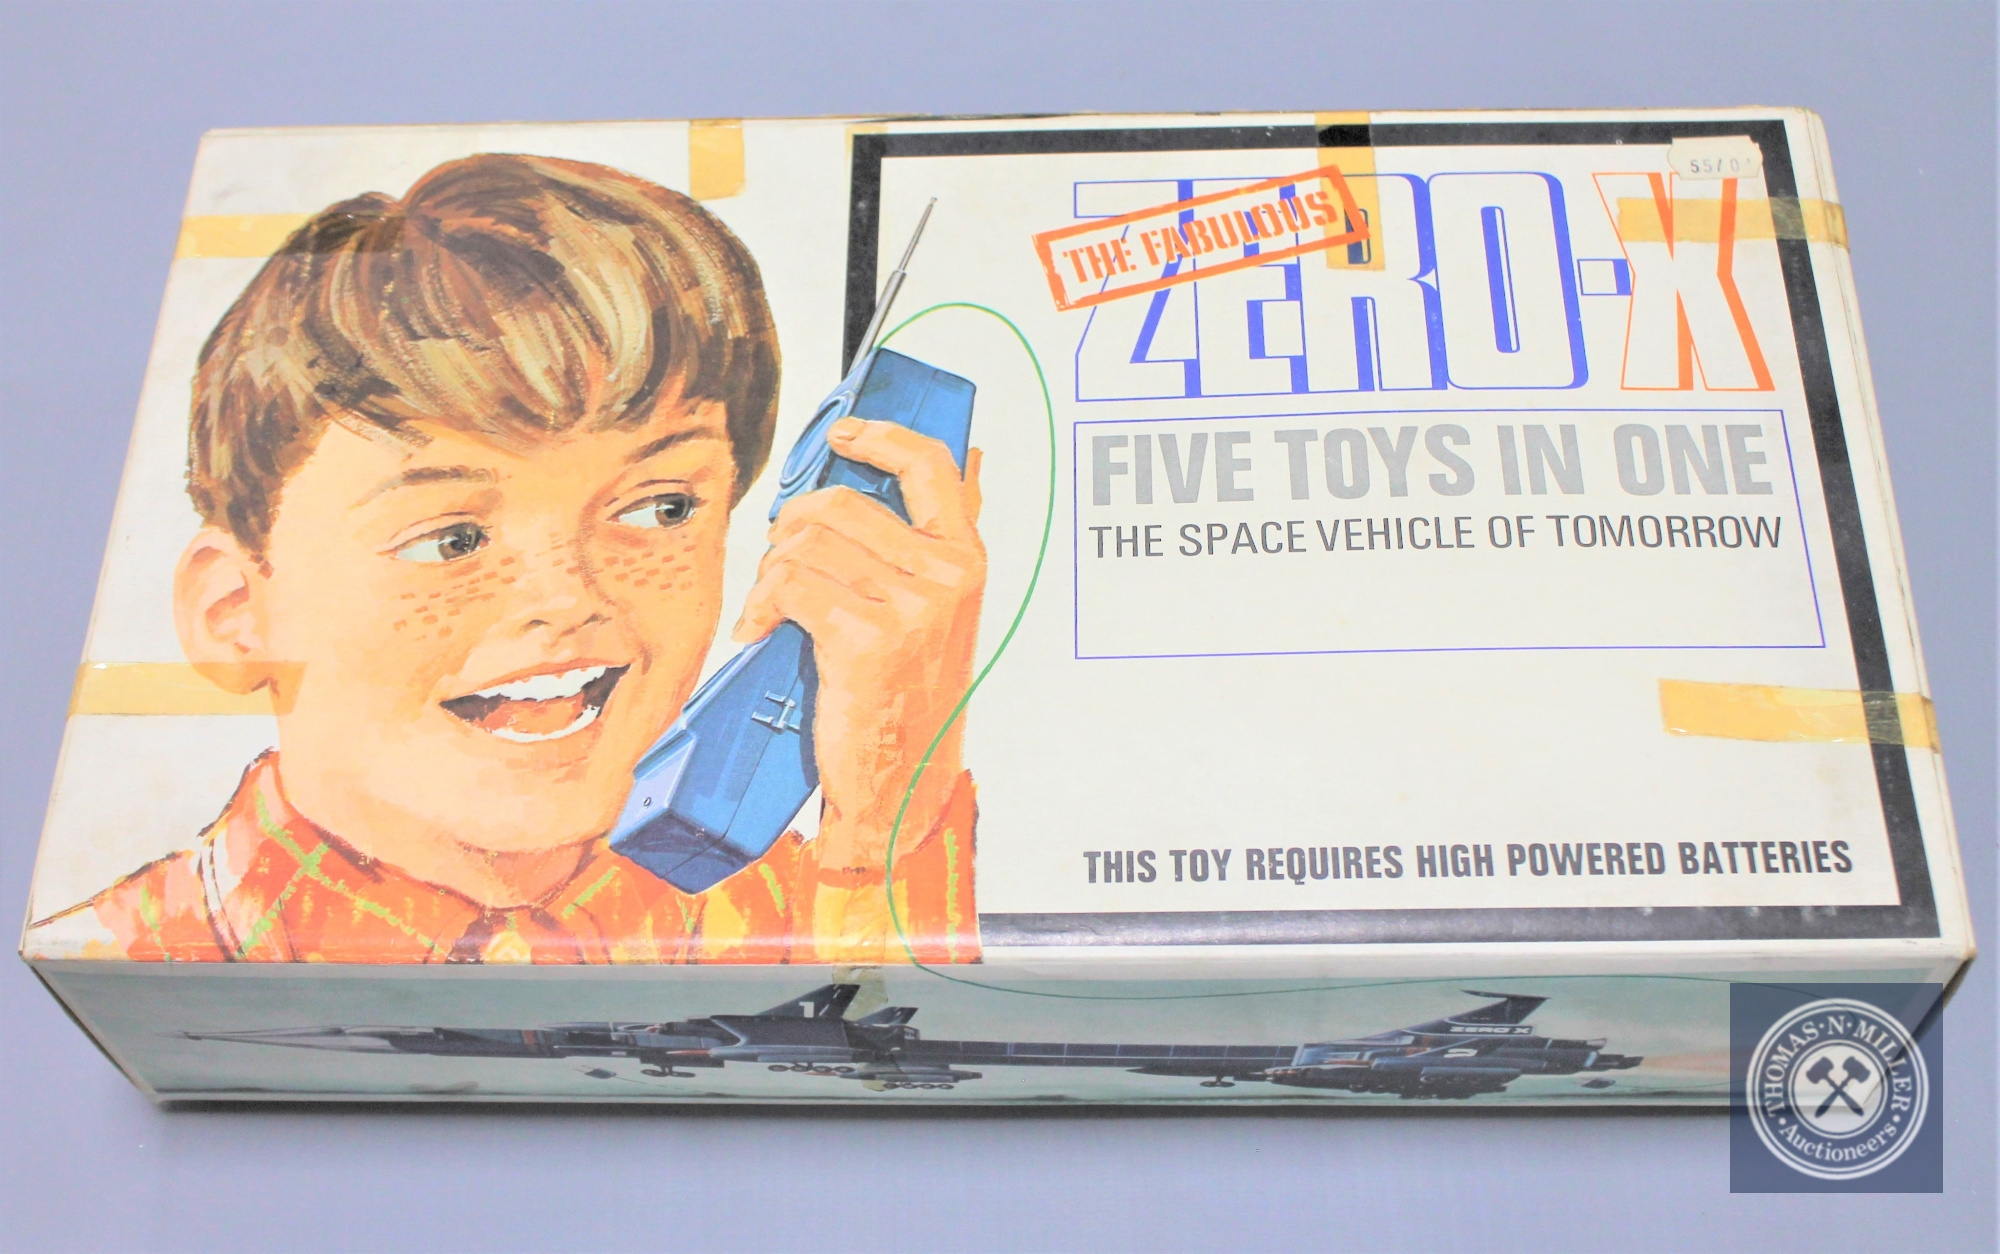 A Zero X 1967 Century 21 Productions 'Five Toys in One', The Space Vehicle of Tomorrow, boxed.